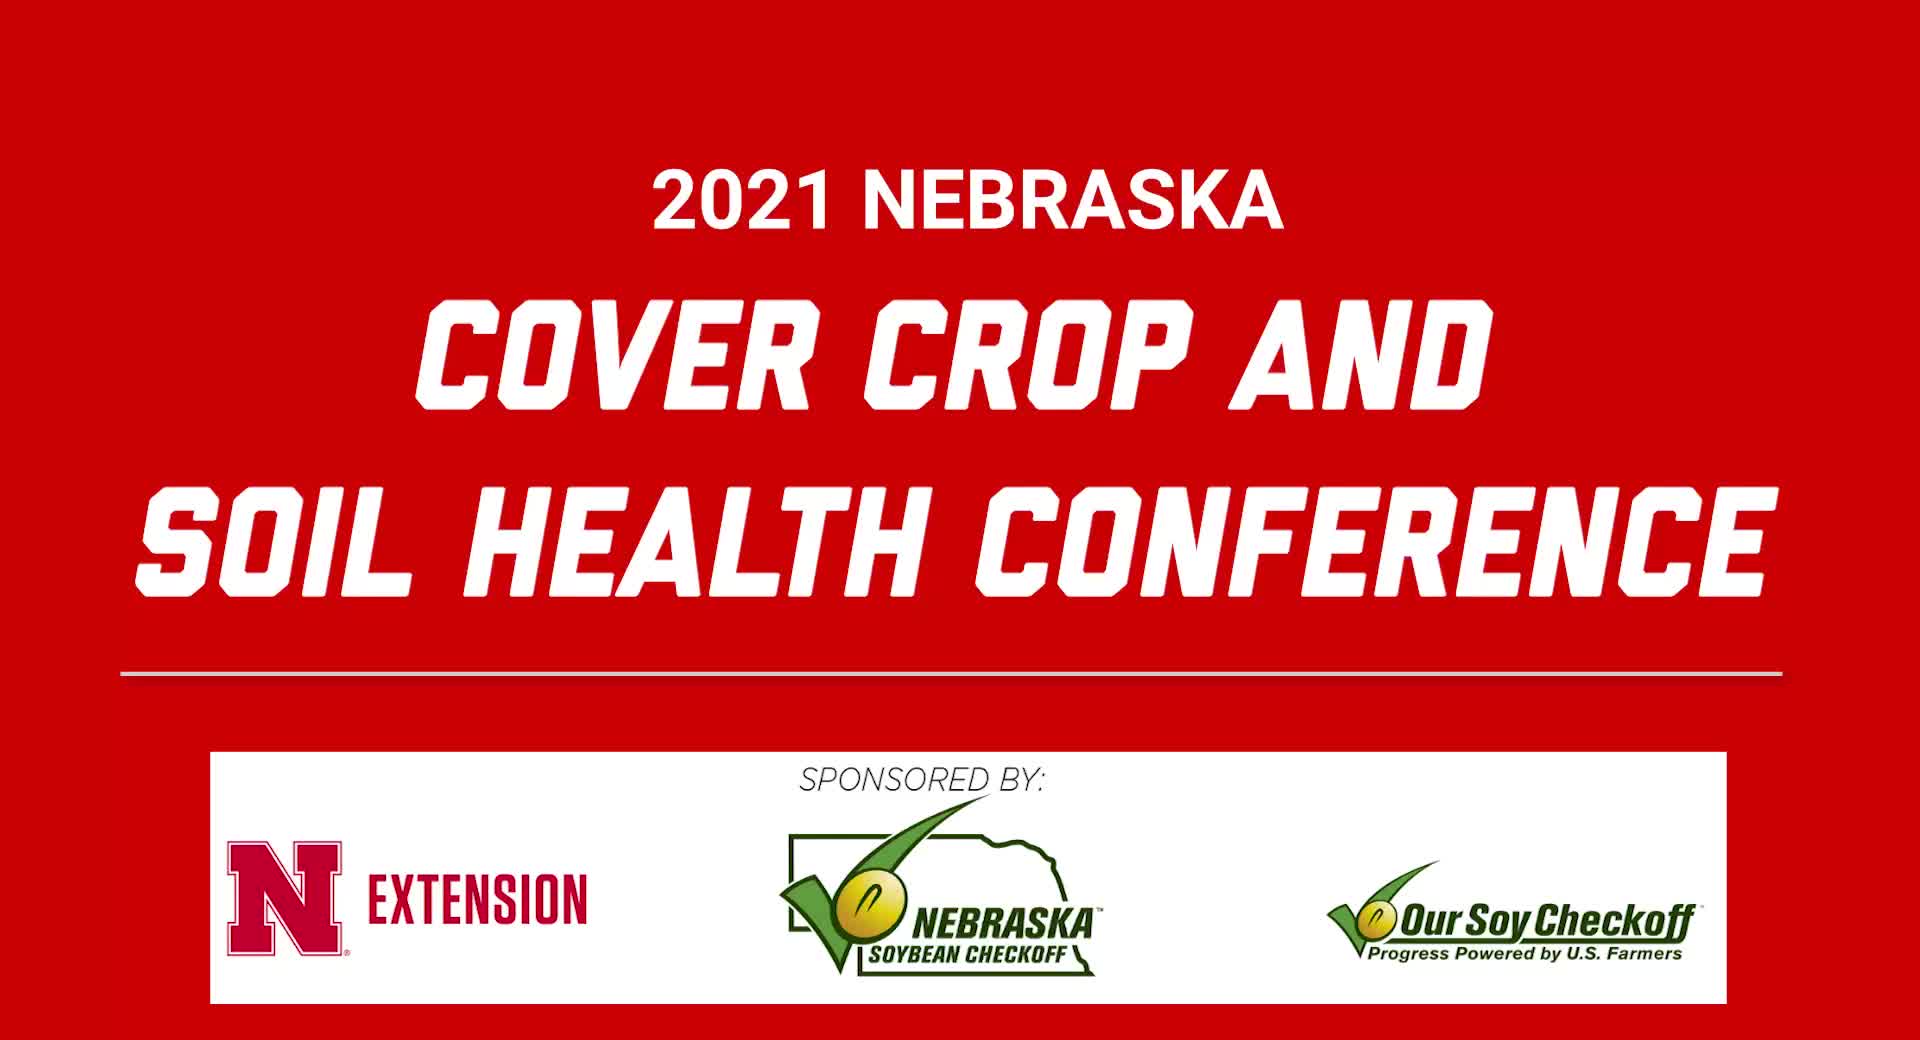 2021 Nebraska Cover Crop and Soil Health Conference - Introduction